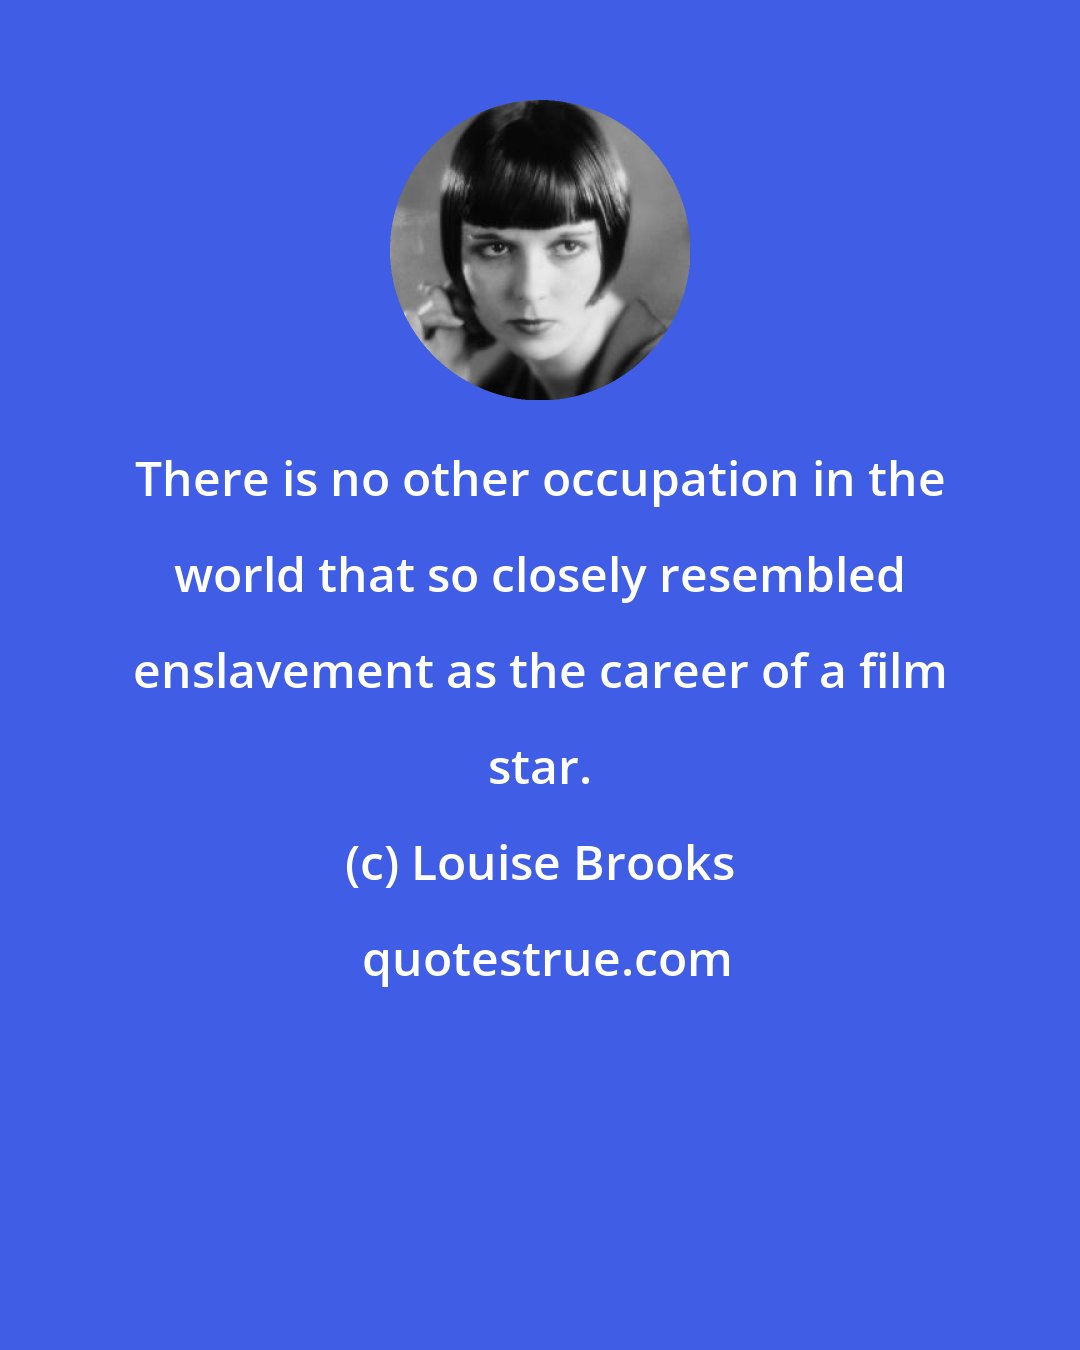 Louise Brooks: There is no other occupation in the world that so closely resembled enslavement as the career of a film star.